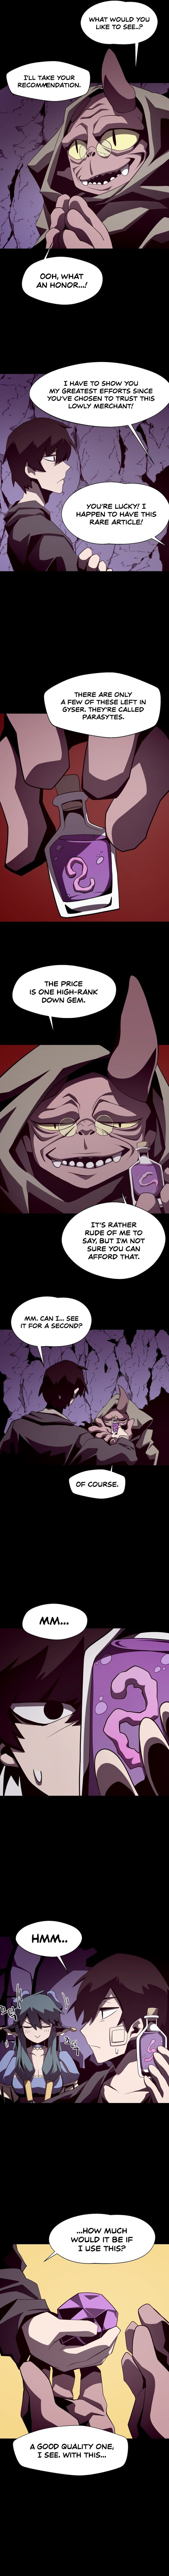 Dungeon Odyssey - Chapter 15 Page 5